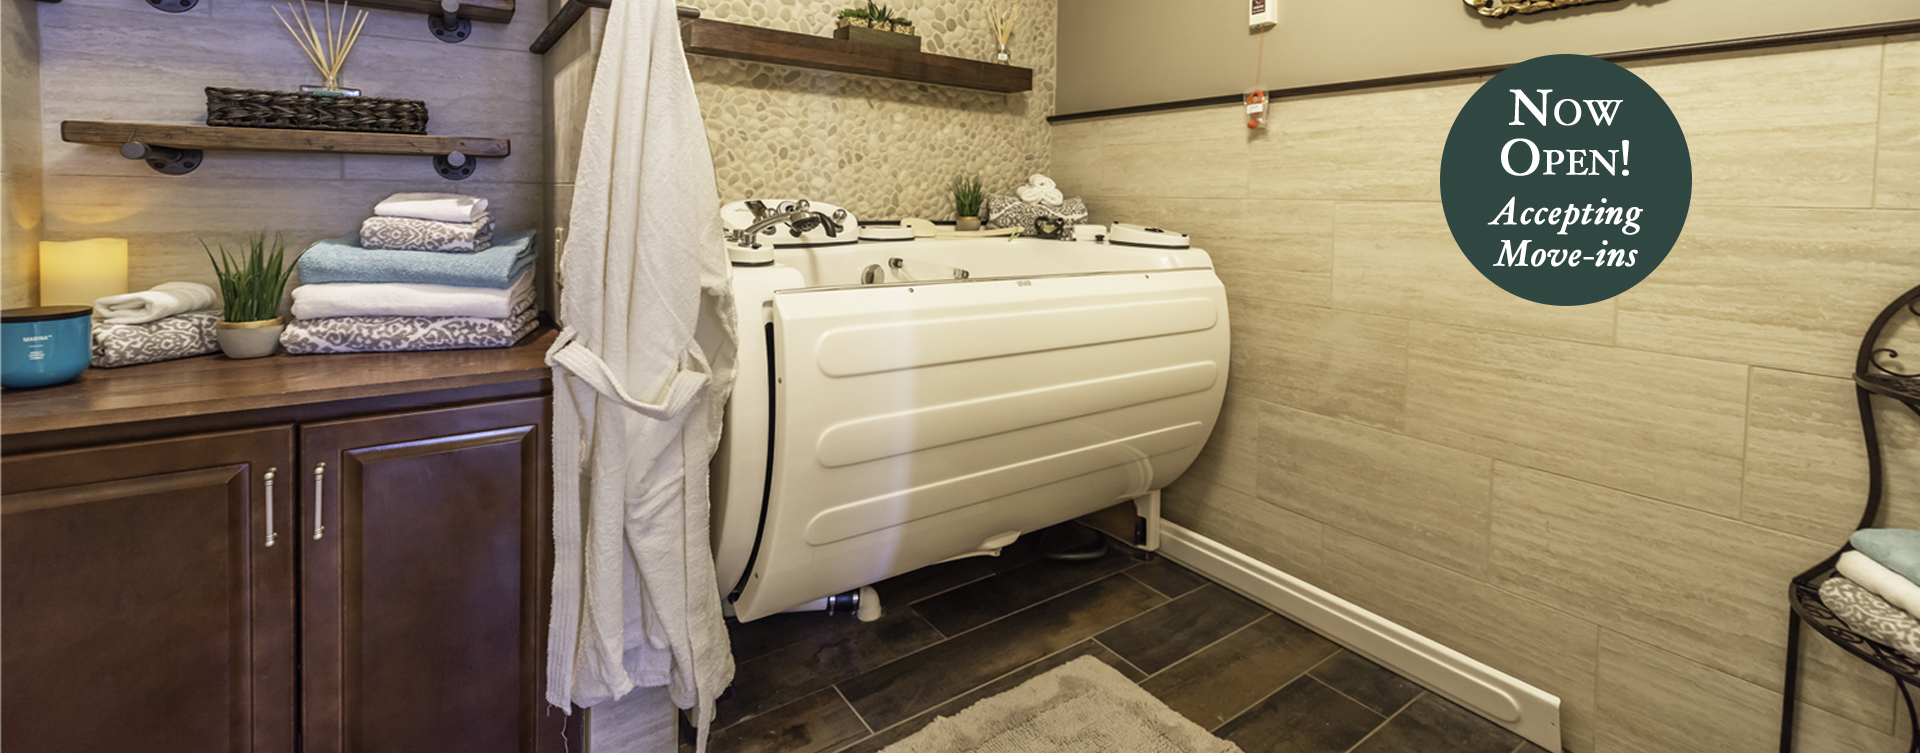 With an easy access design, our whirlpool allows you to enjoy a warm bath safely and comfortably at Bickford of Canton